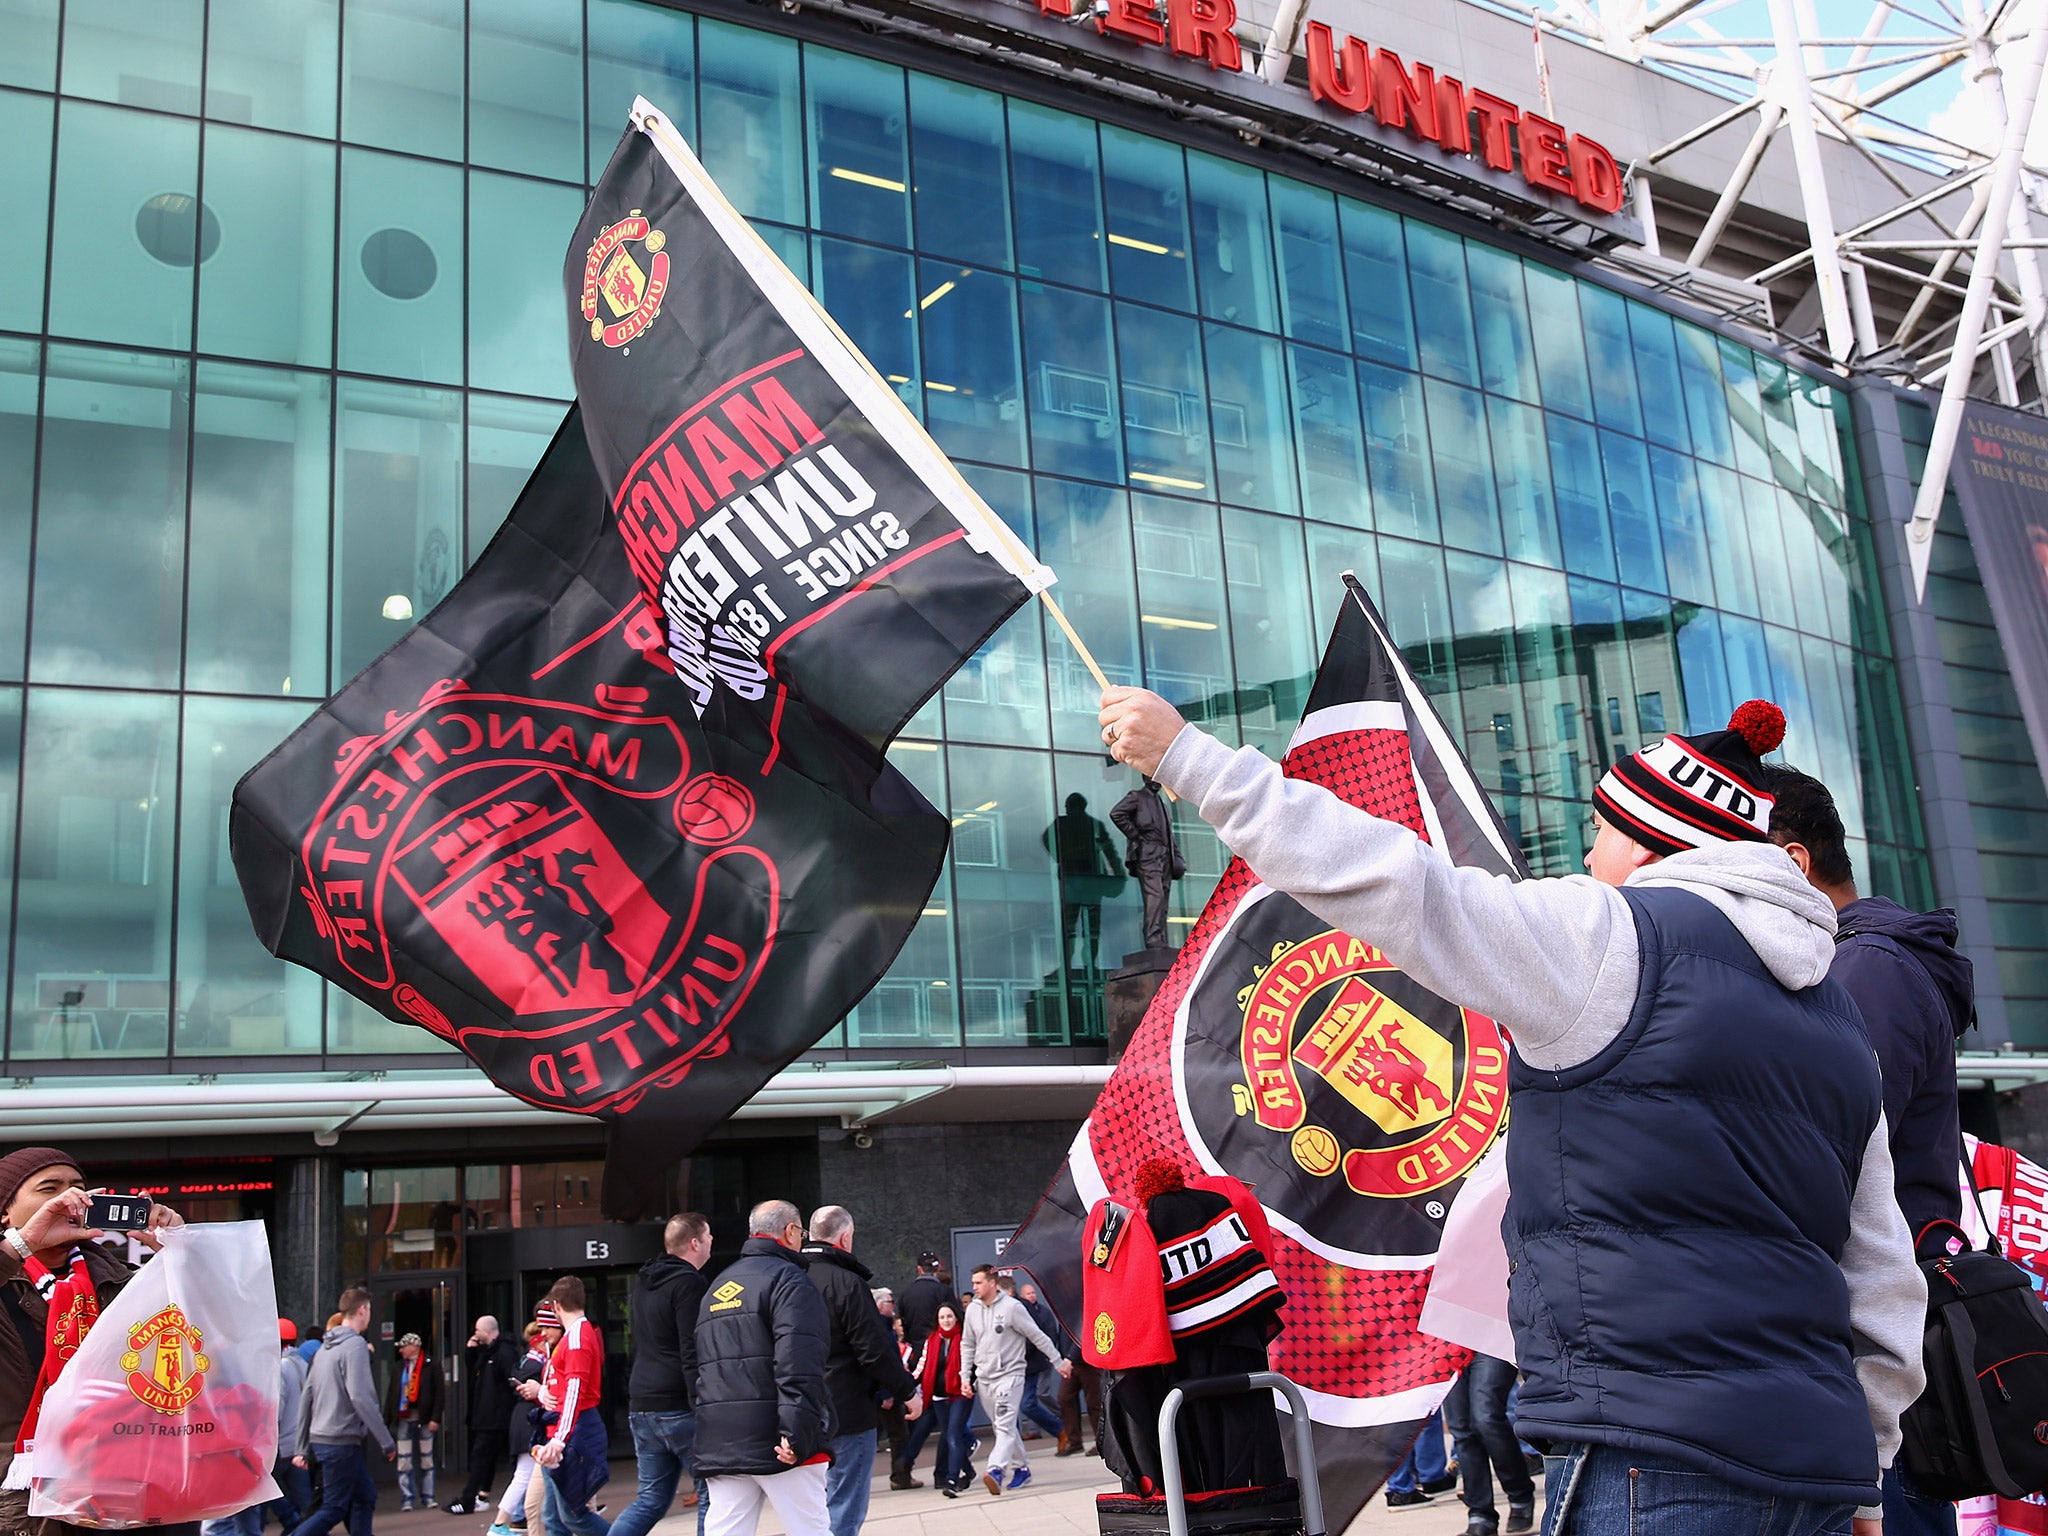 Manchester United fans face being stranded at Wembley after the FA Cup semi-final